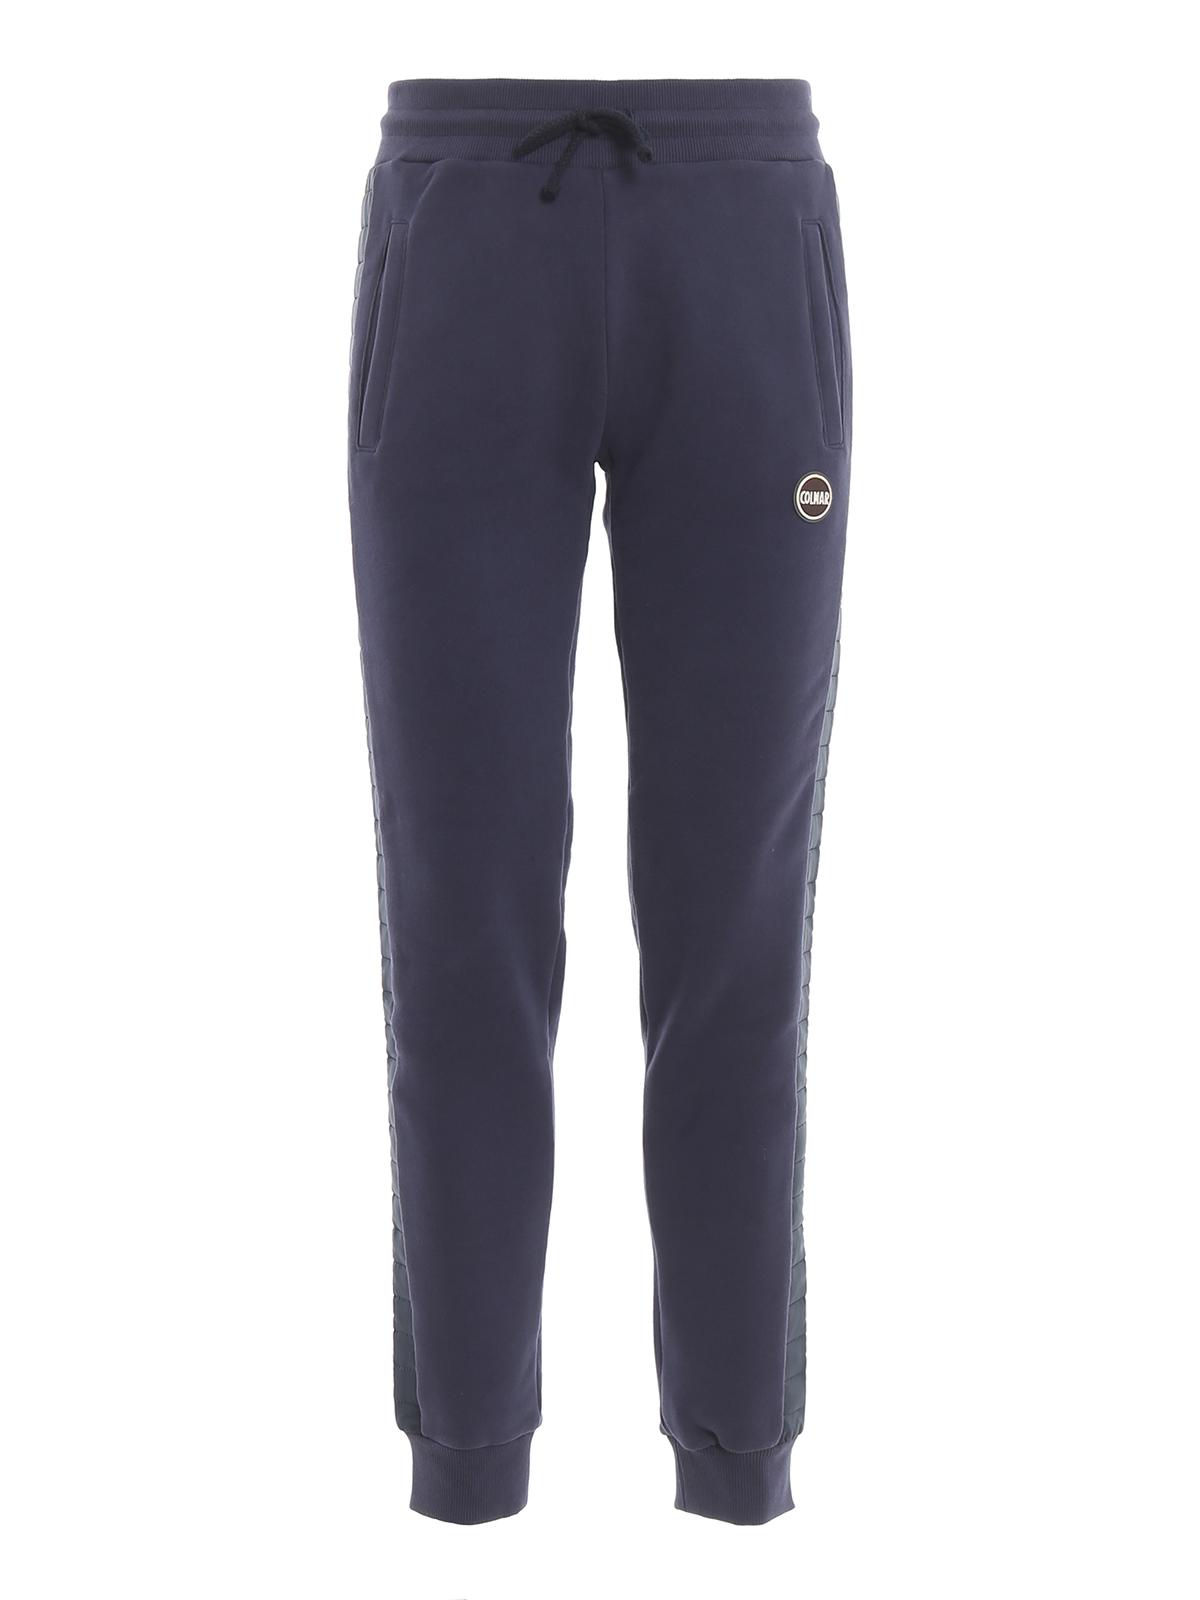 Colmar Cotton jogging Pants With Padded Inserts in Blue for Men - Lyst